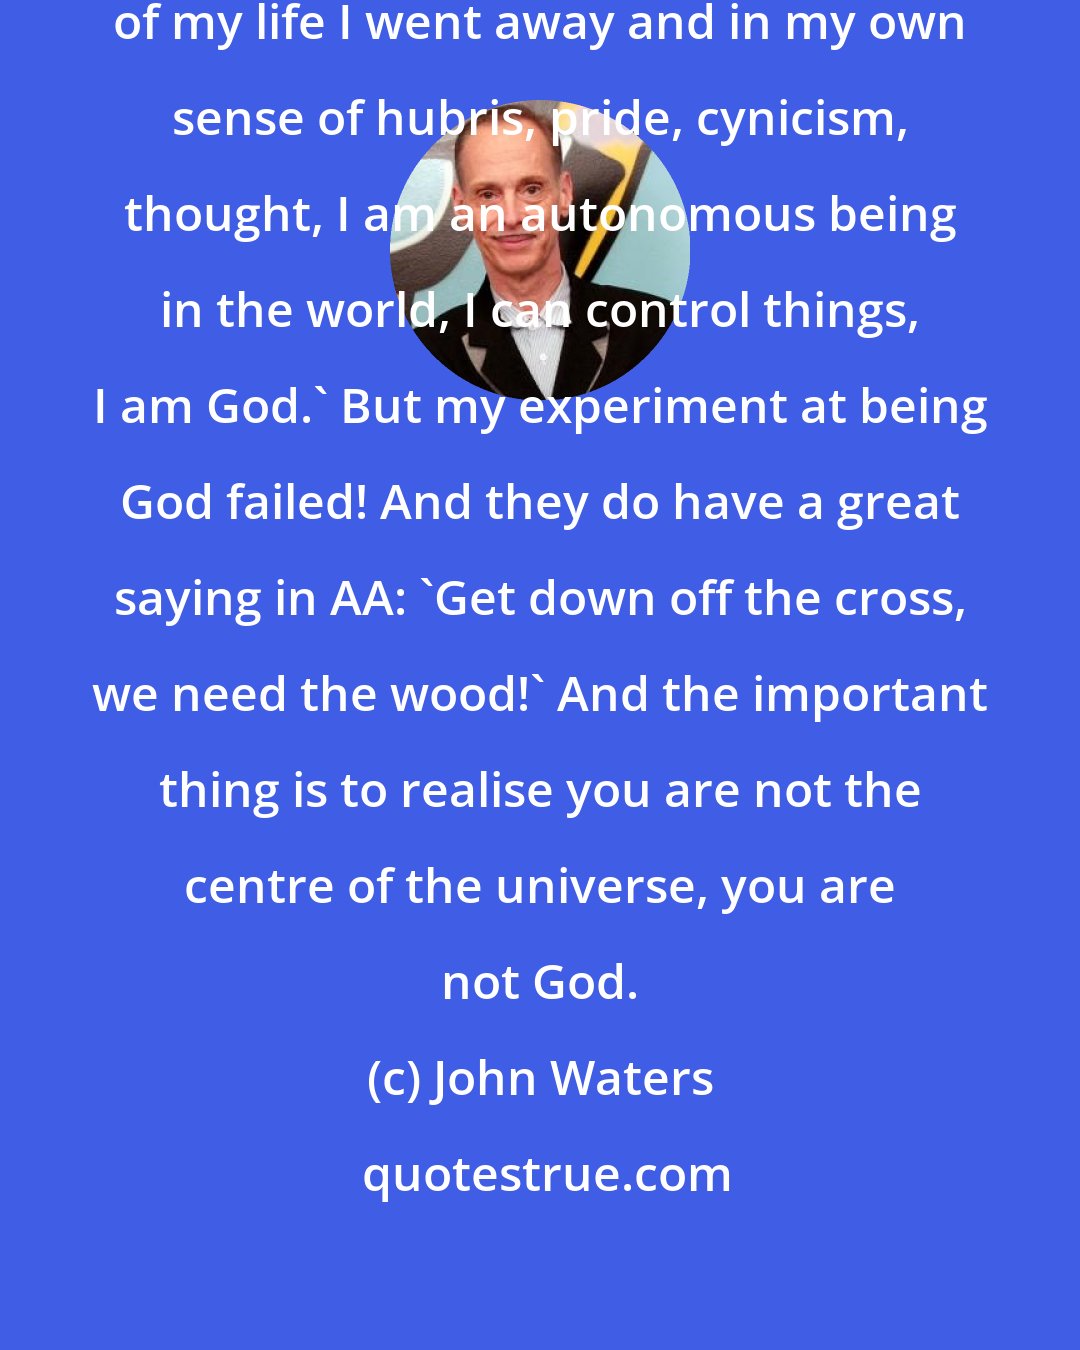 John Waters: What happened is that in the middle of my life I went away and in my own sense of hubris, pride, cynicism, thought, I am an autonomous being in the world, I can control things, I am God.' But my experiment at being God failed! And they do have a great saying in AA: 'Get down off the cross, we need the wood!' And the important thing is to realise you are not the centre of the universe, you are not God.